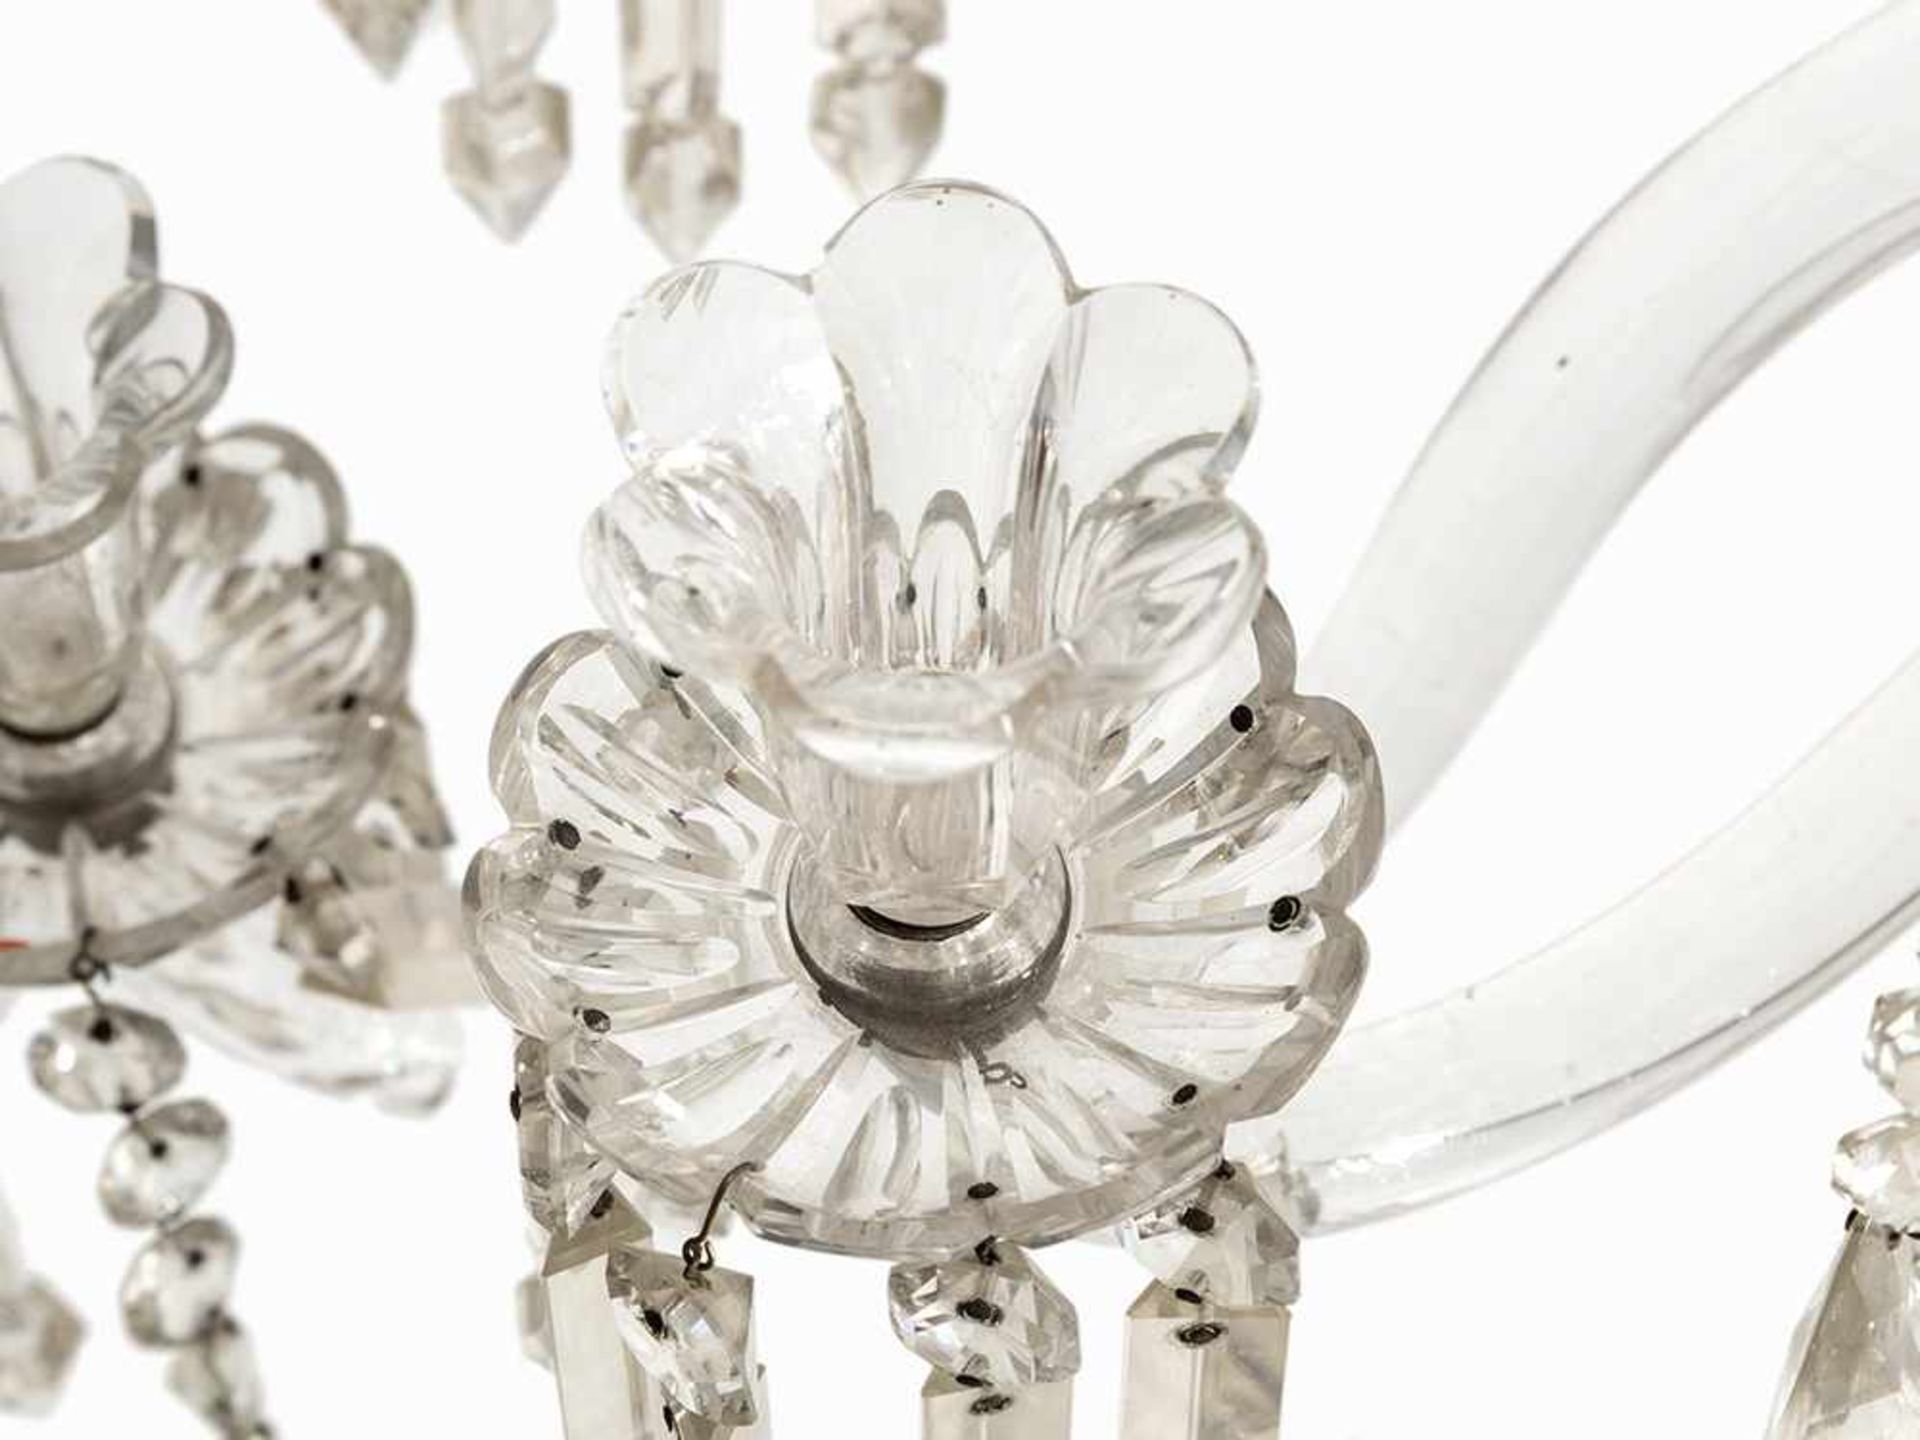 Magnificent Baccarat Chandelier, France, 19th C. Baccarat crystal France, 19th century 30 electric - Image 7 of 10